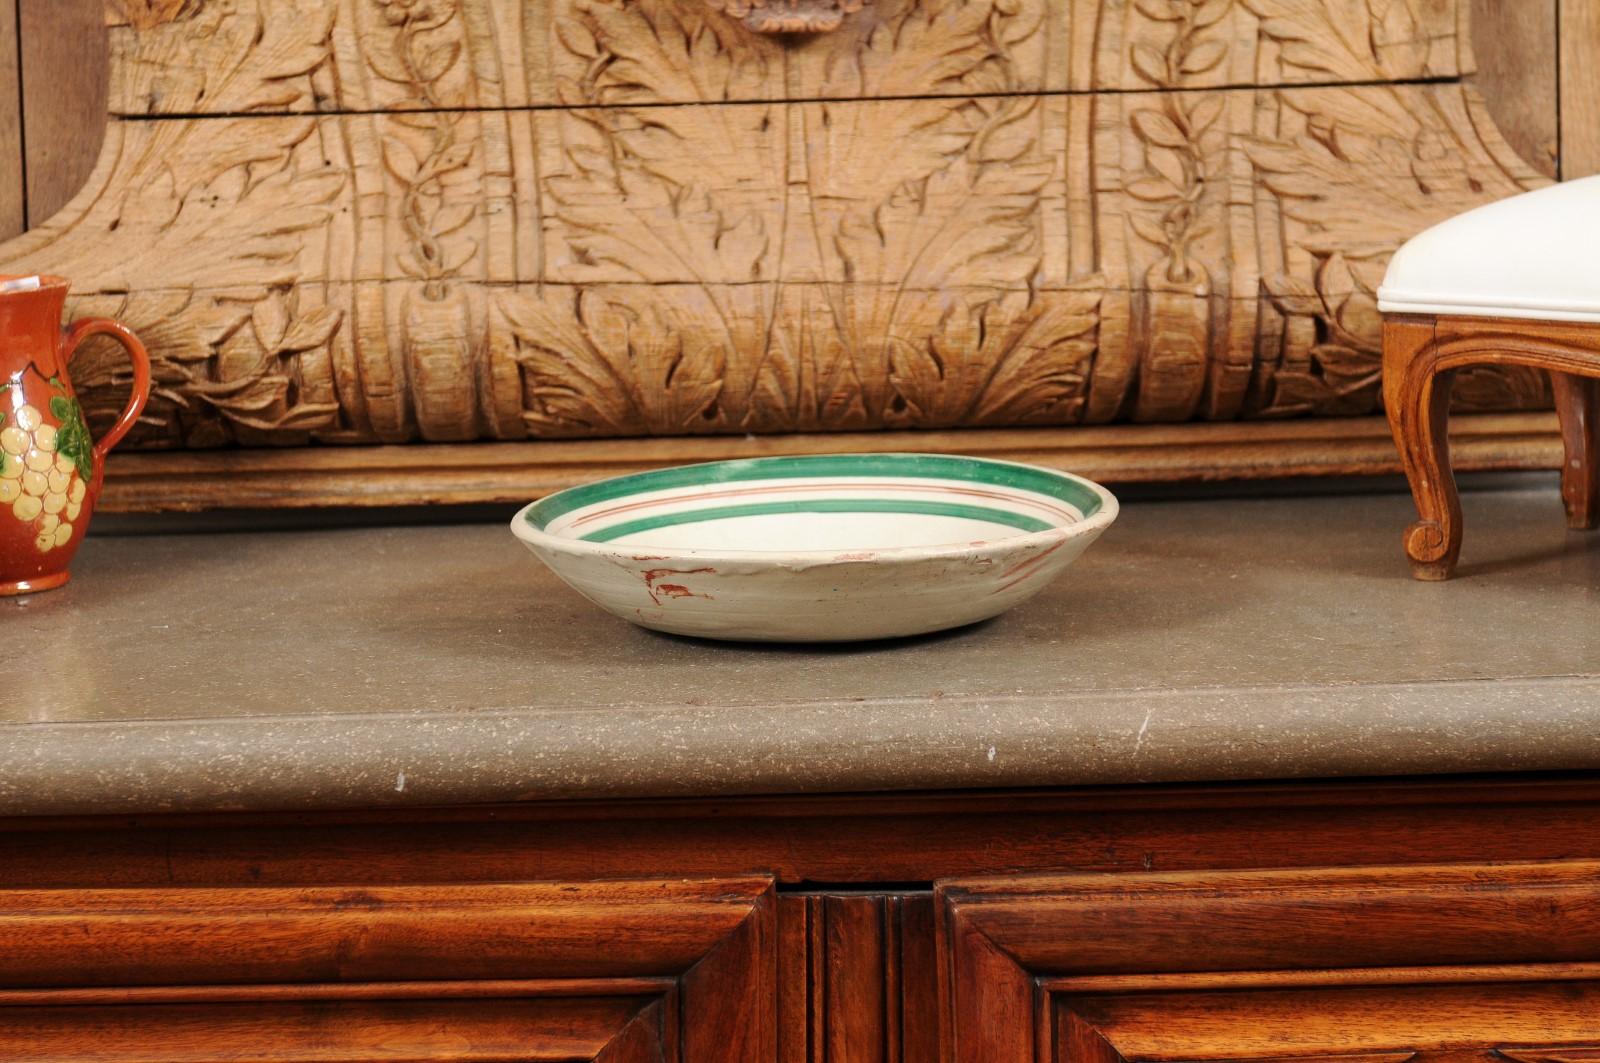 An Italian pottery bowl from the early 20th century, with rooster motif and green border. Created in Italy during the early years of the 20th century, this pottery bowl charms us with its archaïc depiction of a rooster represented in profile.